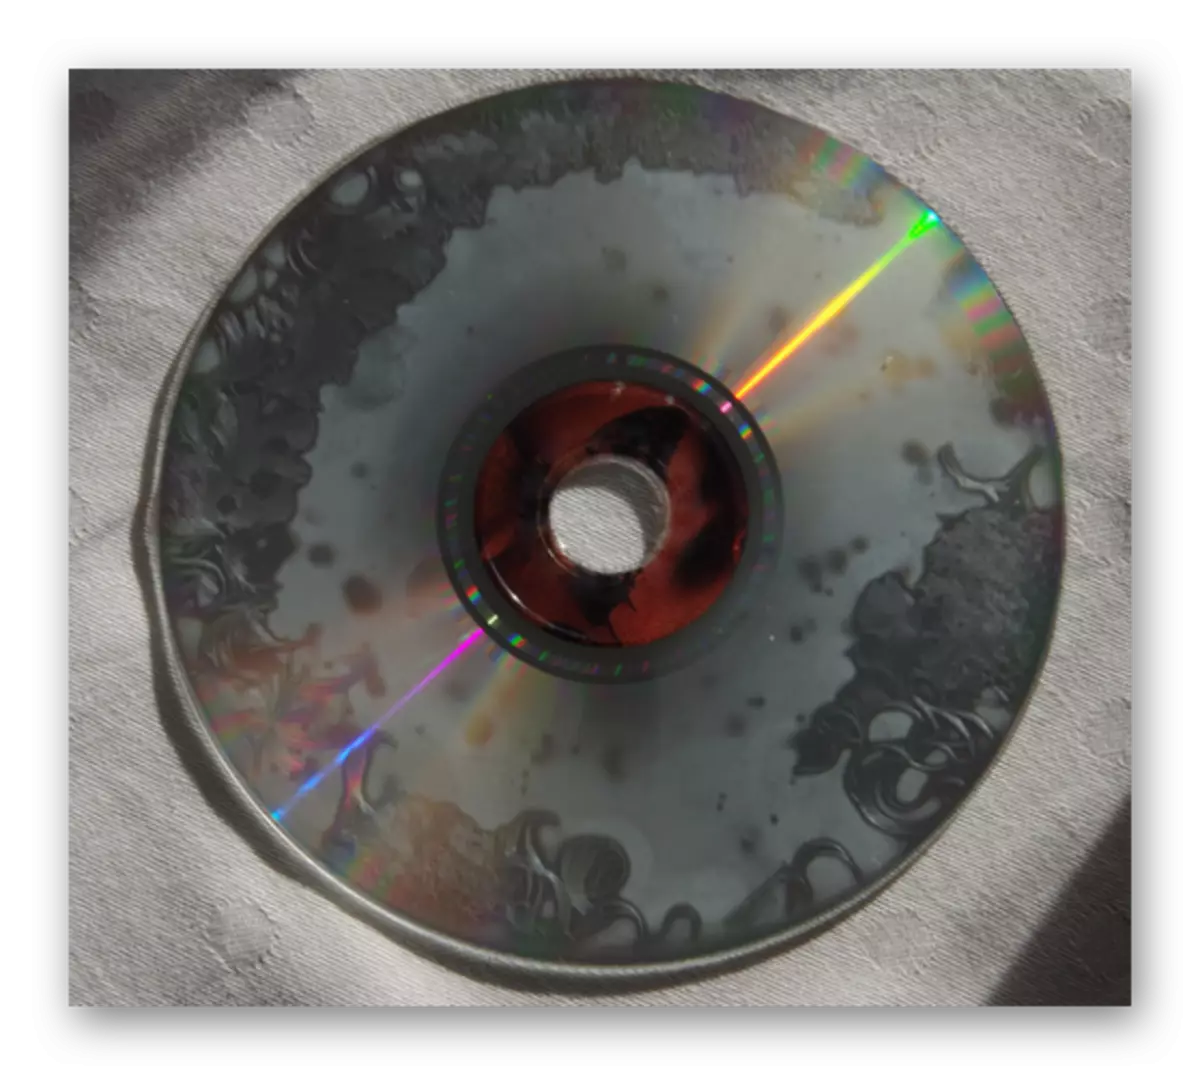 Example of a strongly damaged optical disk